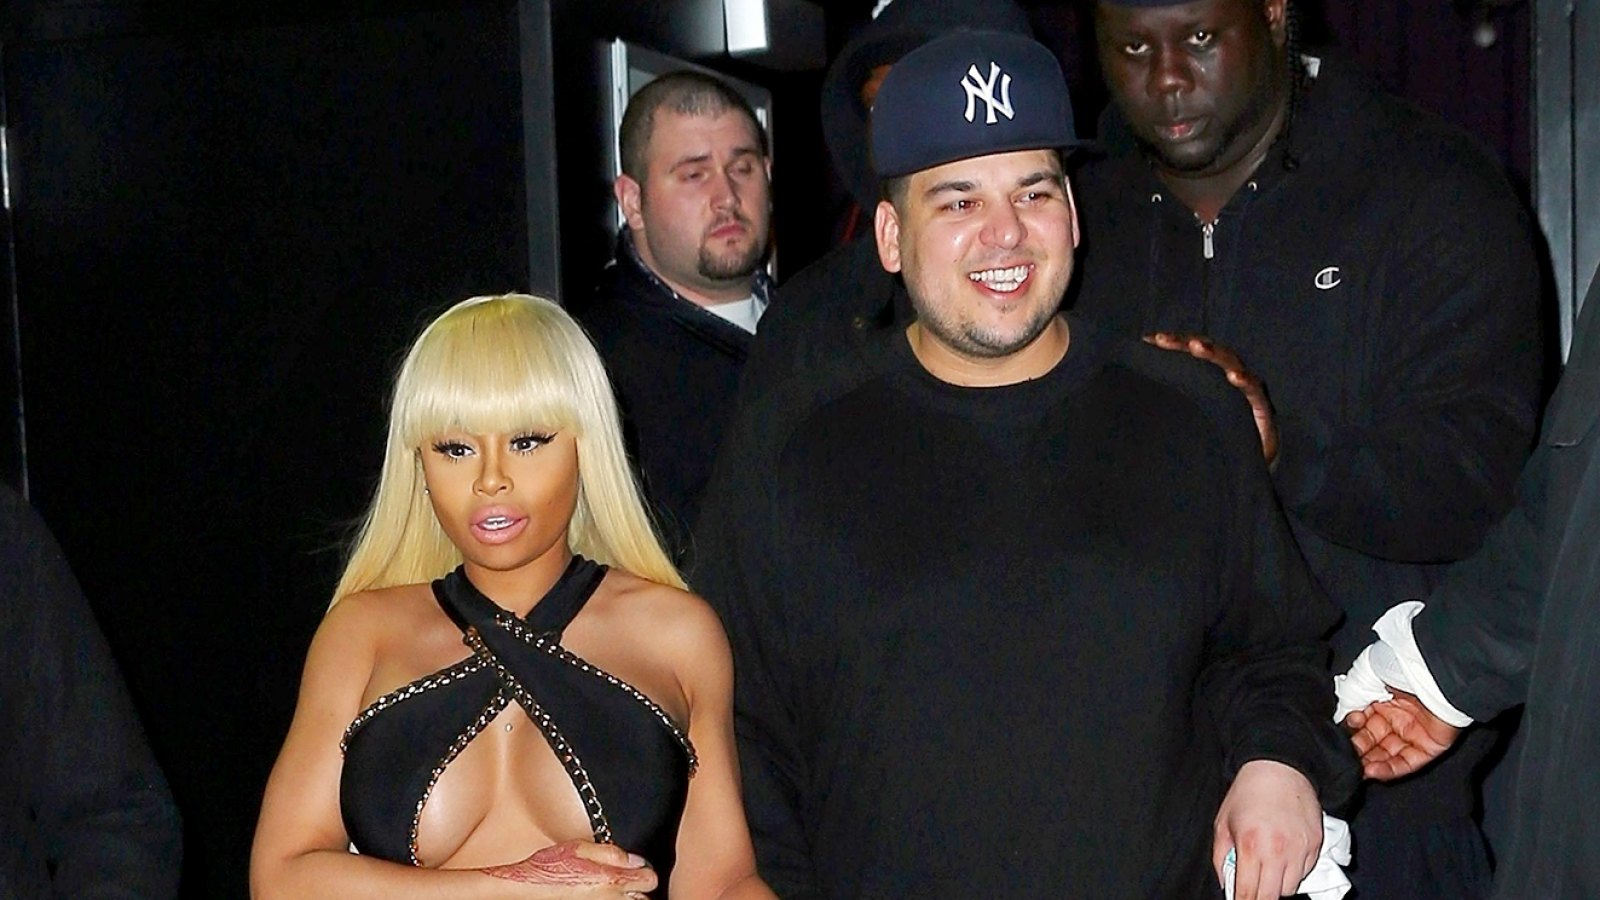 Rob Kardashian holds fiancee Blac Chyna's hand when walking out of ACES strip club in Queens, NY on their first New York appearance together